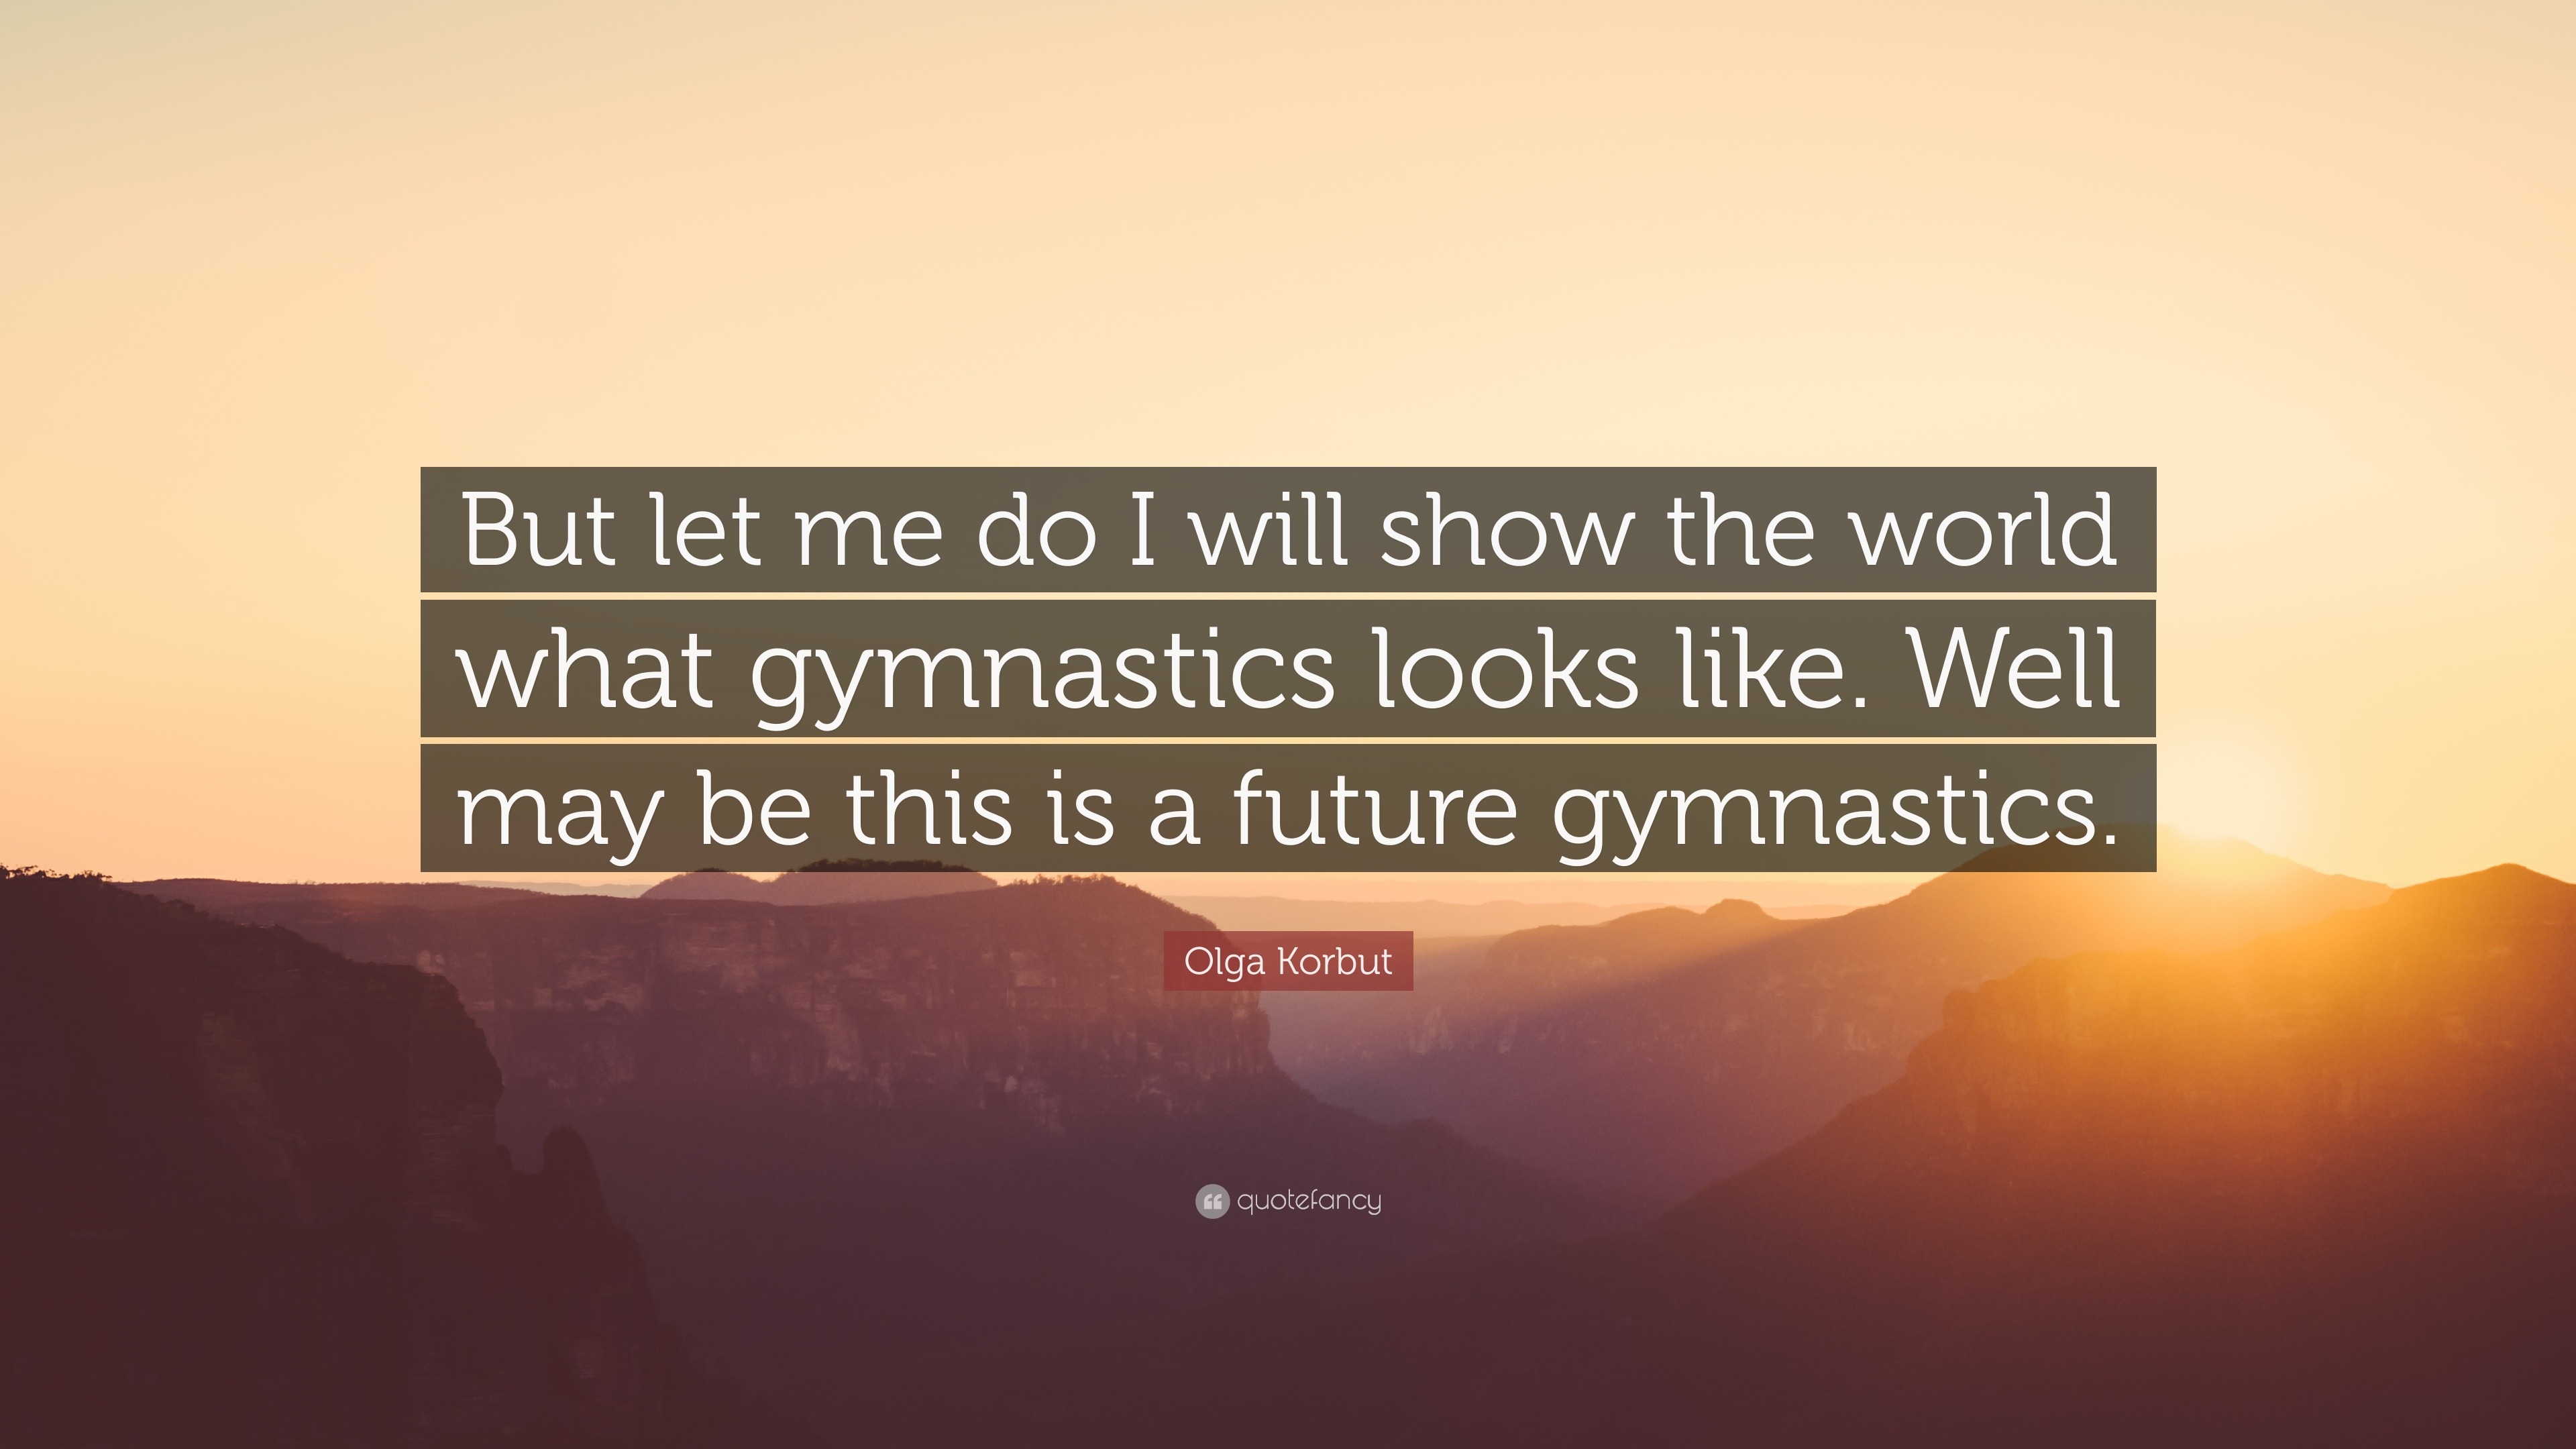 Olga Korbut Quote: “Its better to have a rich soul than to be rich.”